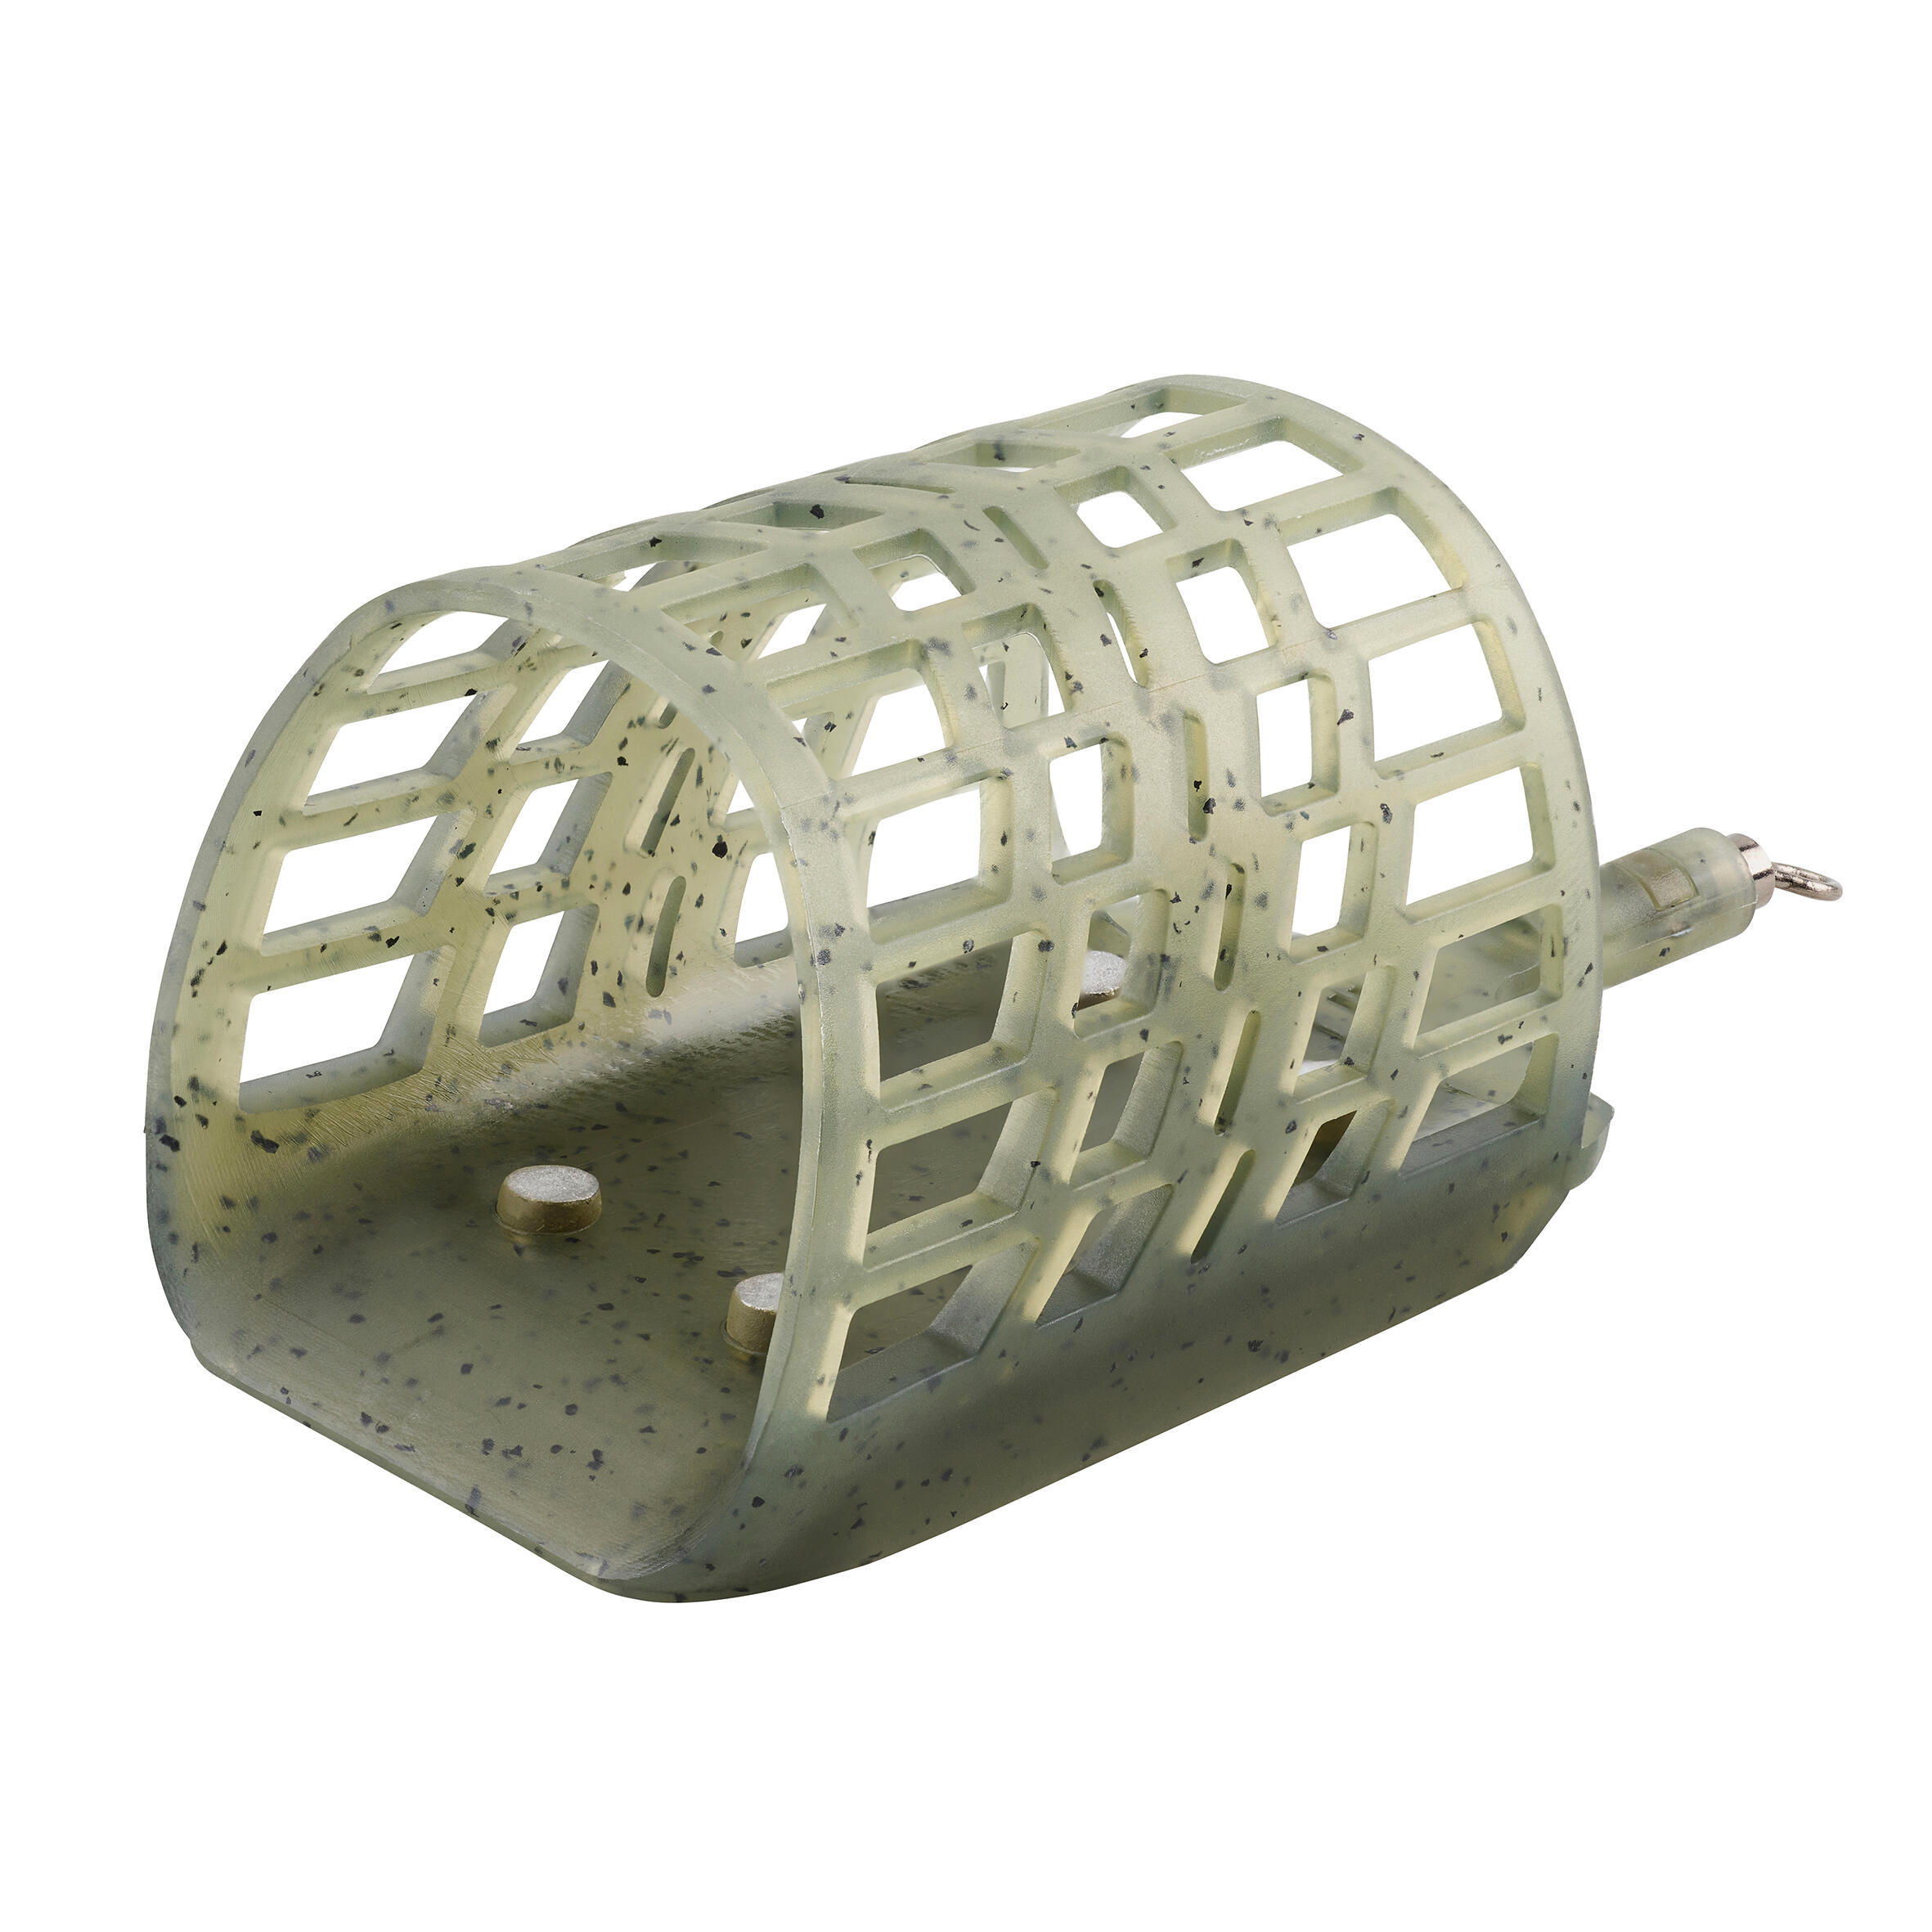 Size large open cage feeder for feeder fishing, FEEDER - SO - L. 7/9